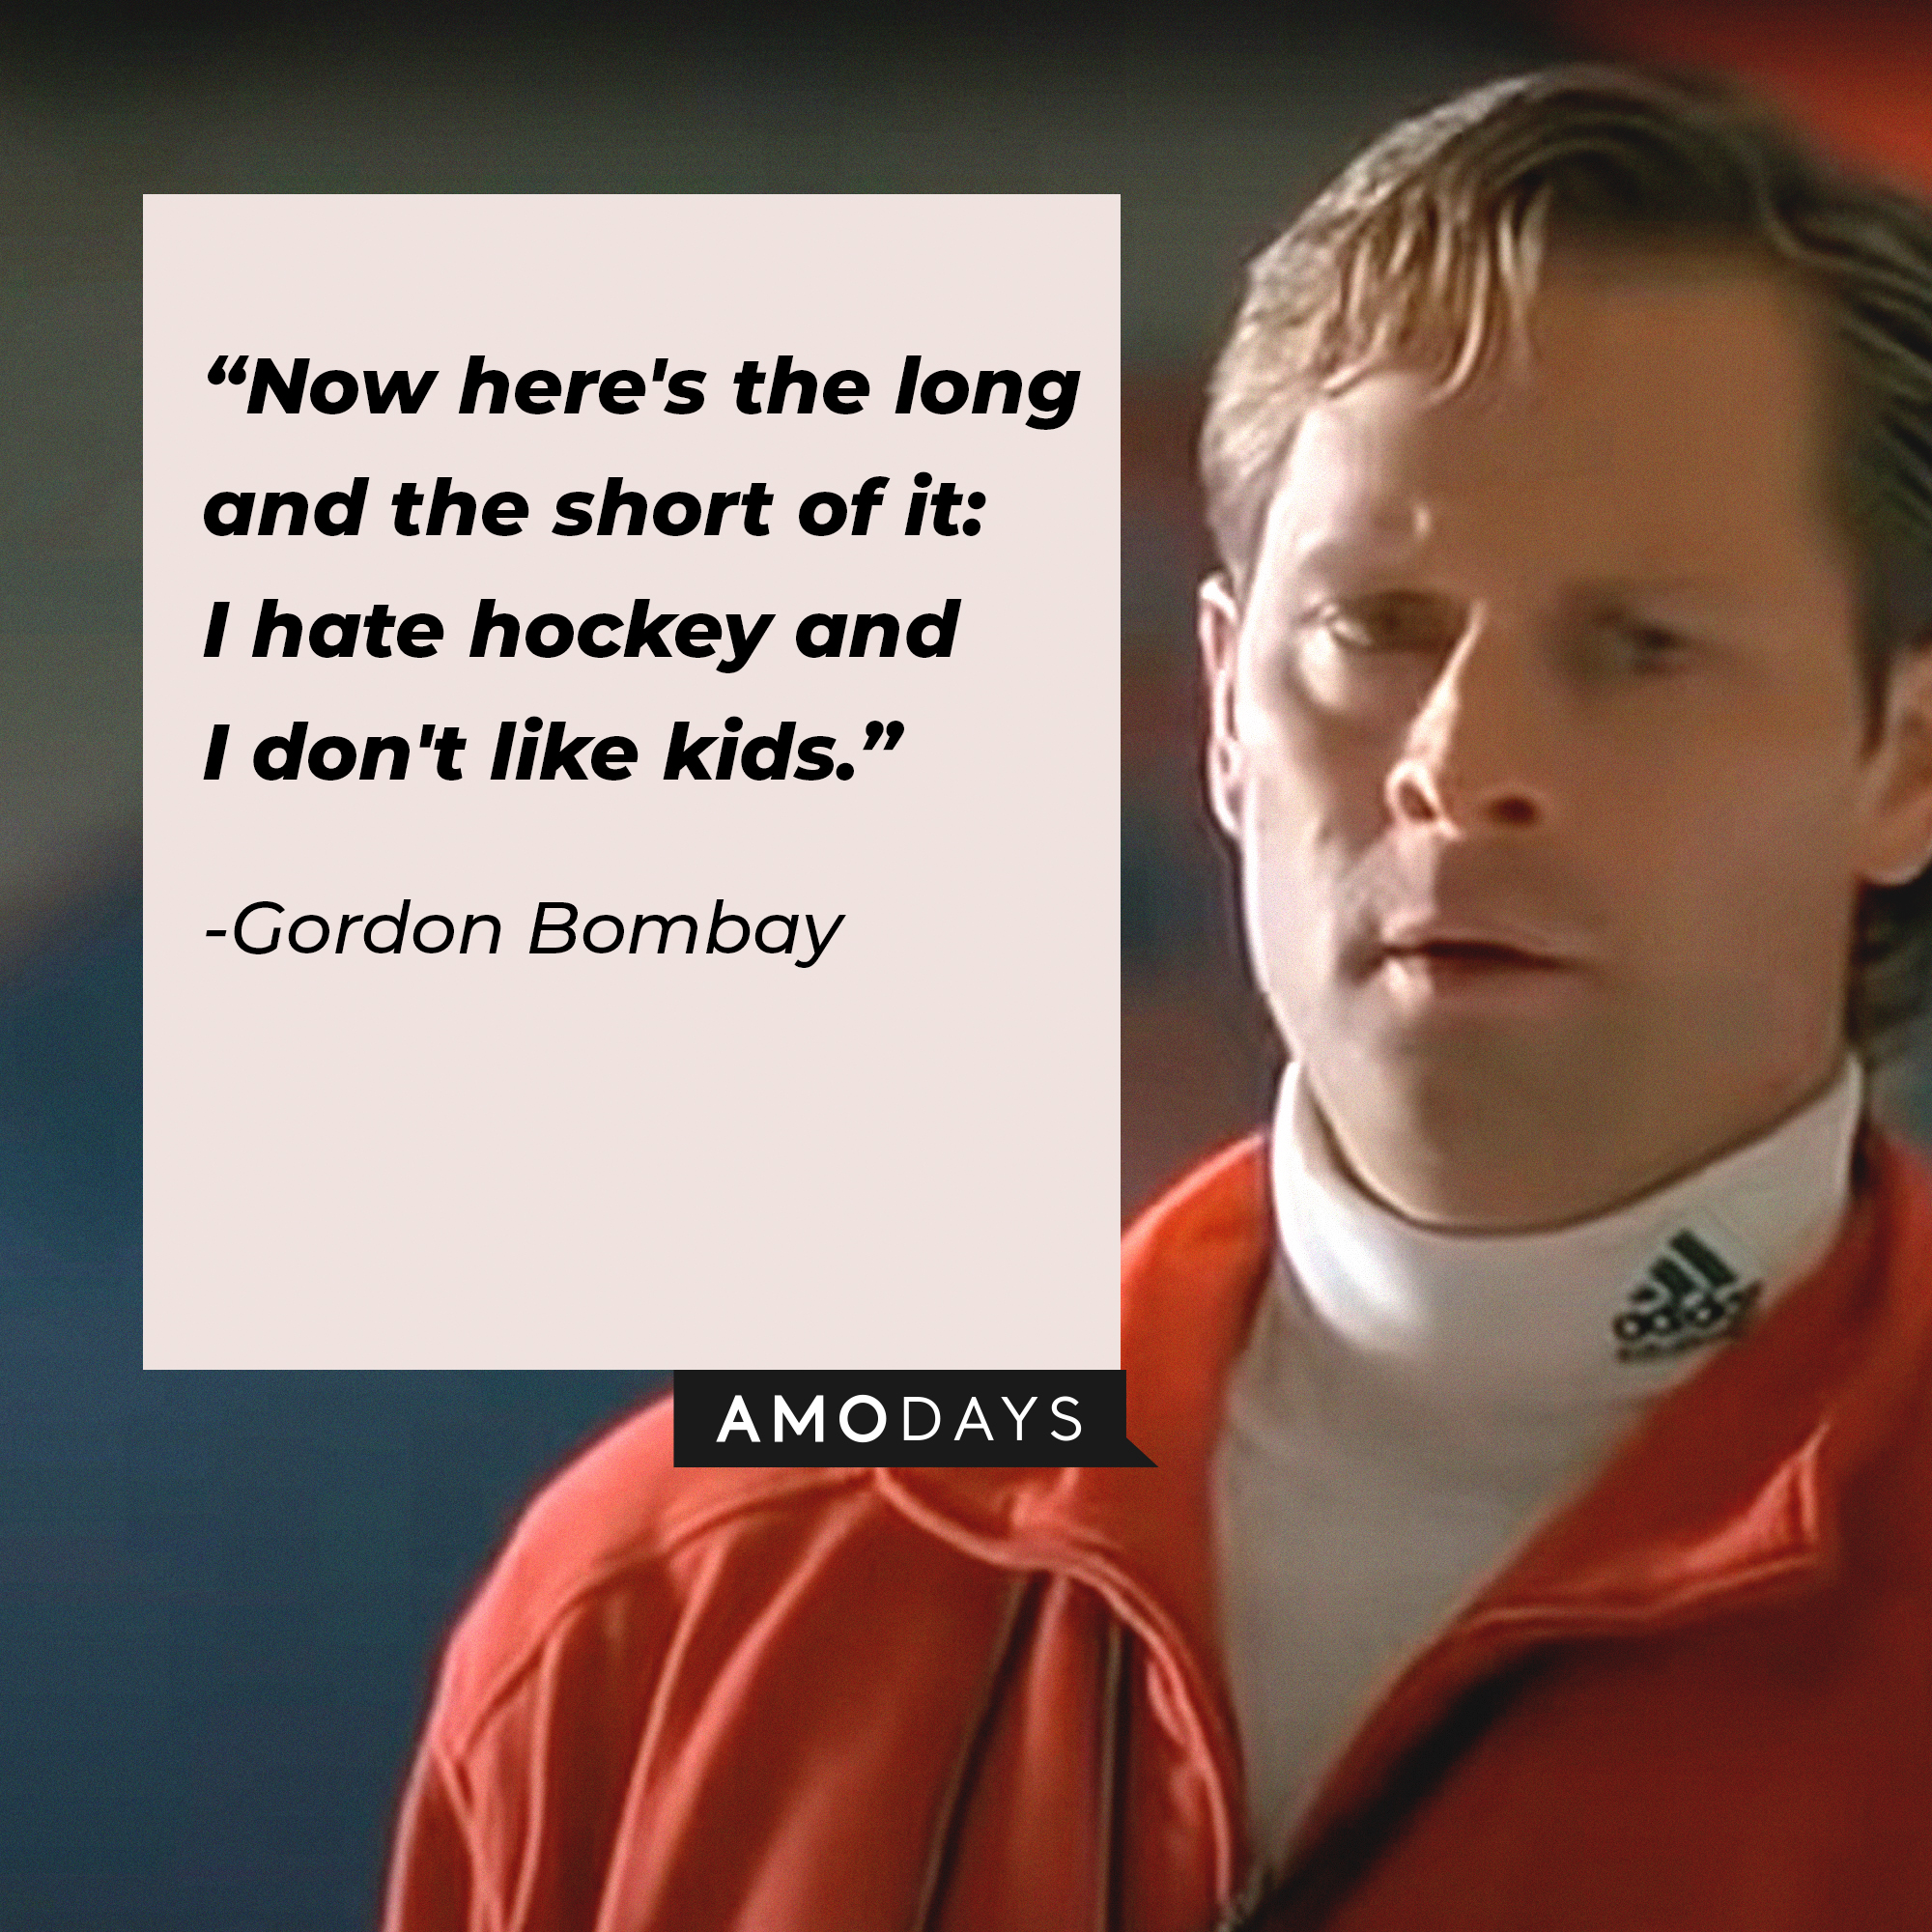 A picture of Gordon Bombay with a quote by him : “Now here's the long and the short of it: I hate hockey and I don't like kids.” | Source: youtube.com/disneyplus